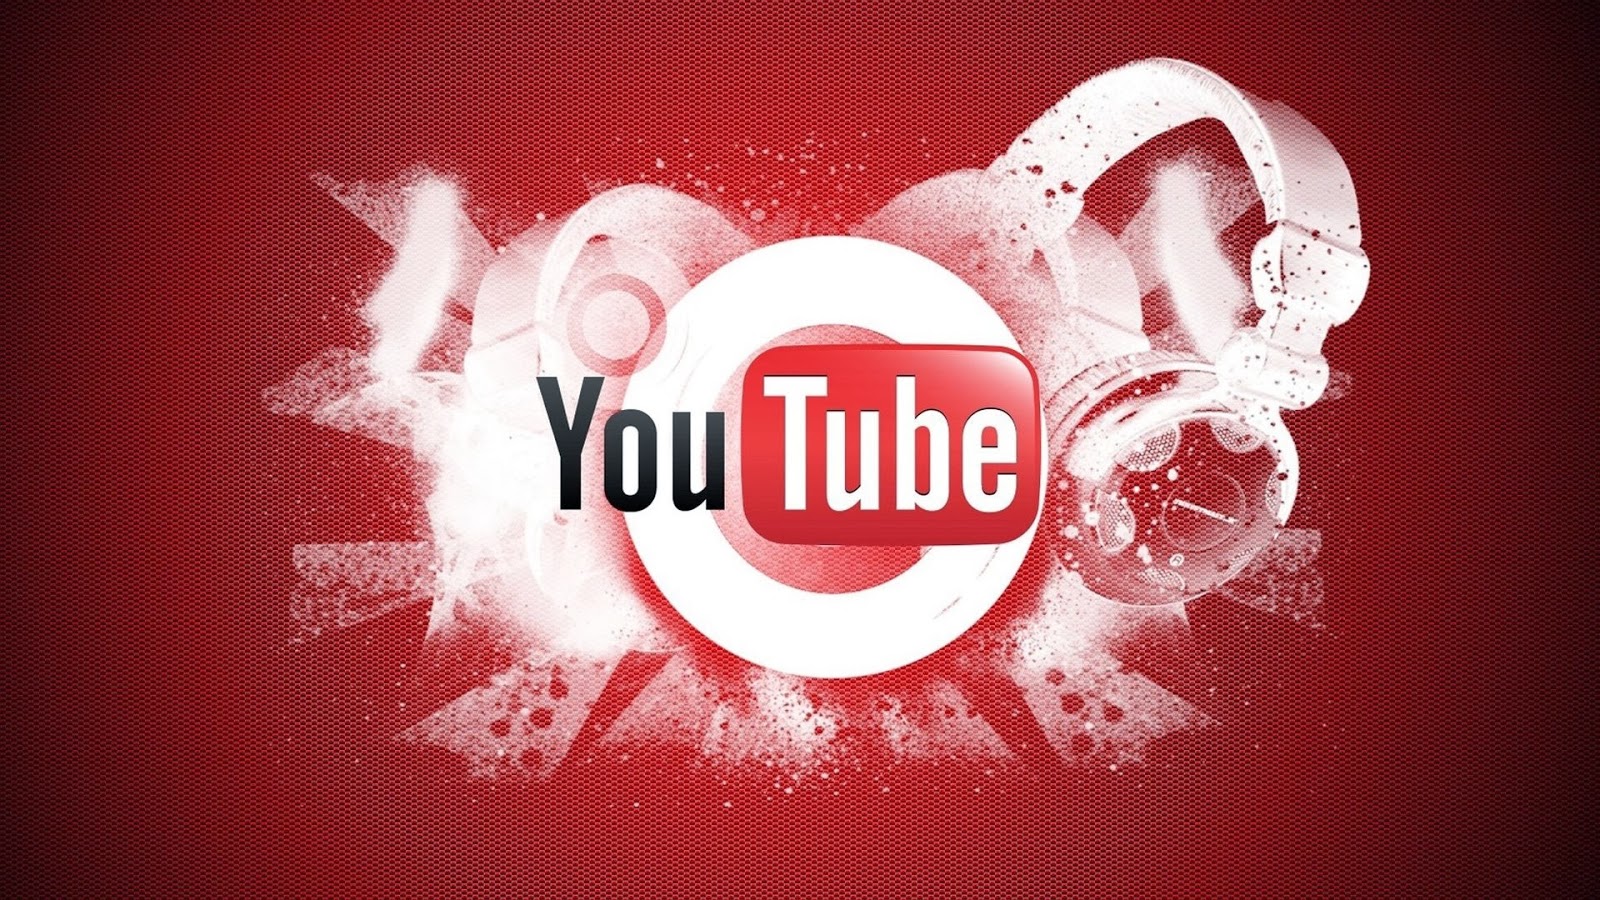 Another update from YouTube; which will enable the marketers to target consumers on TV screens